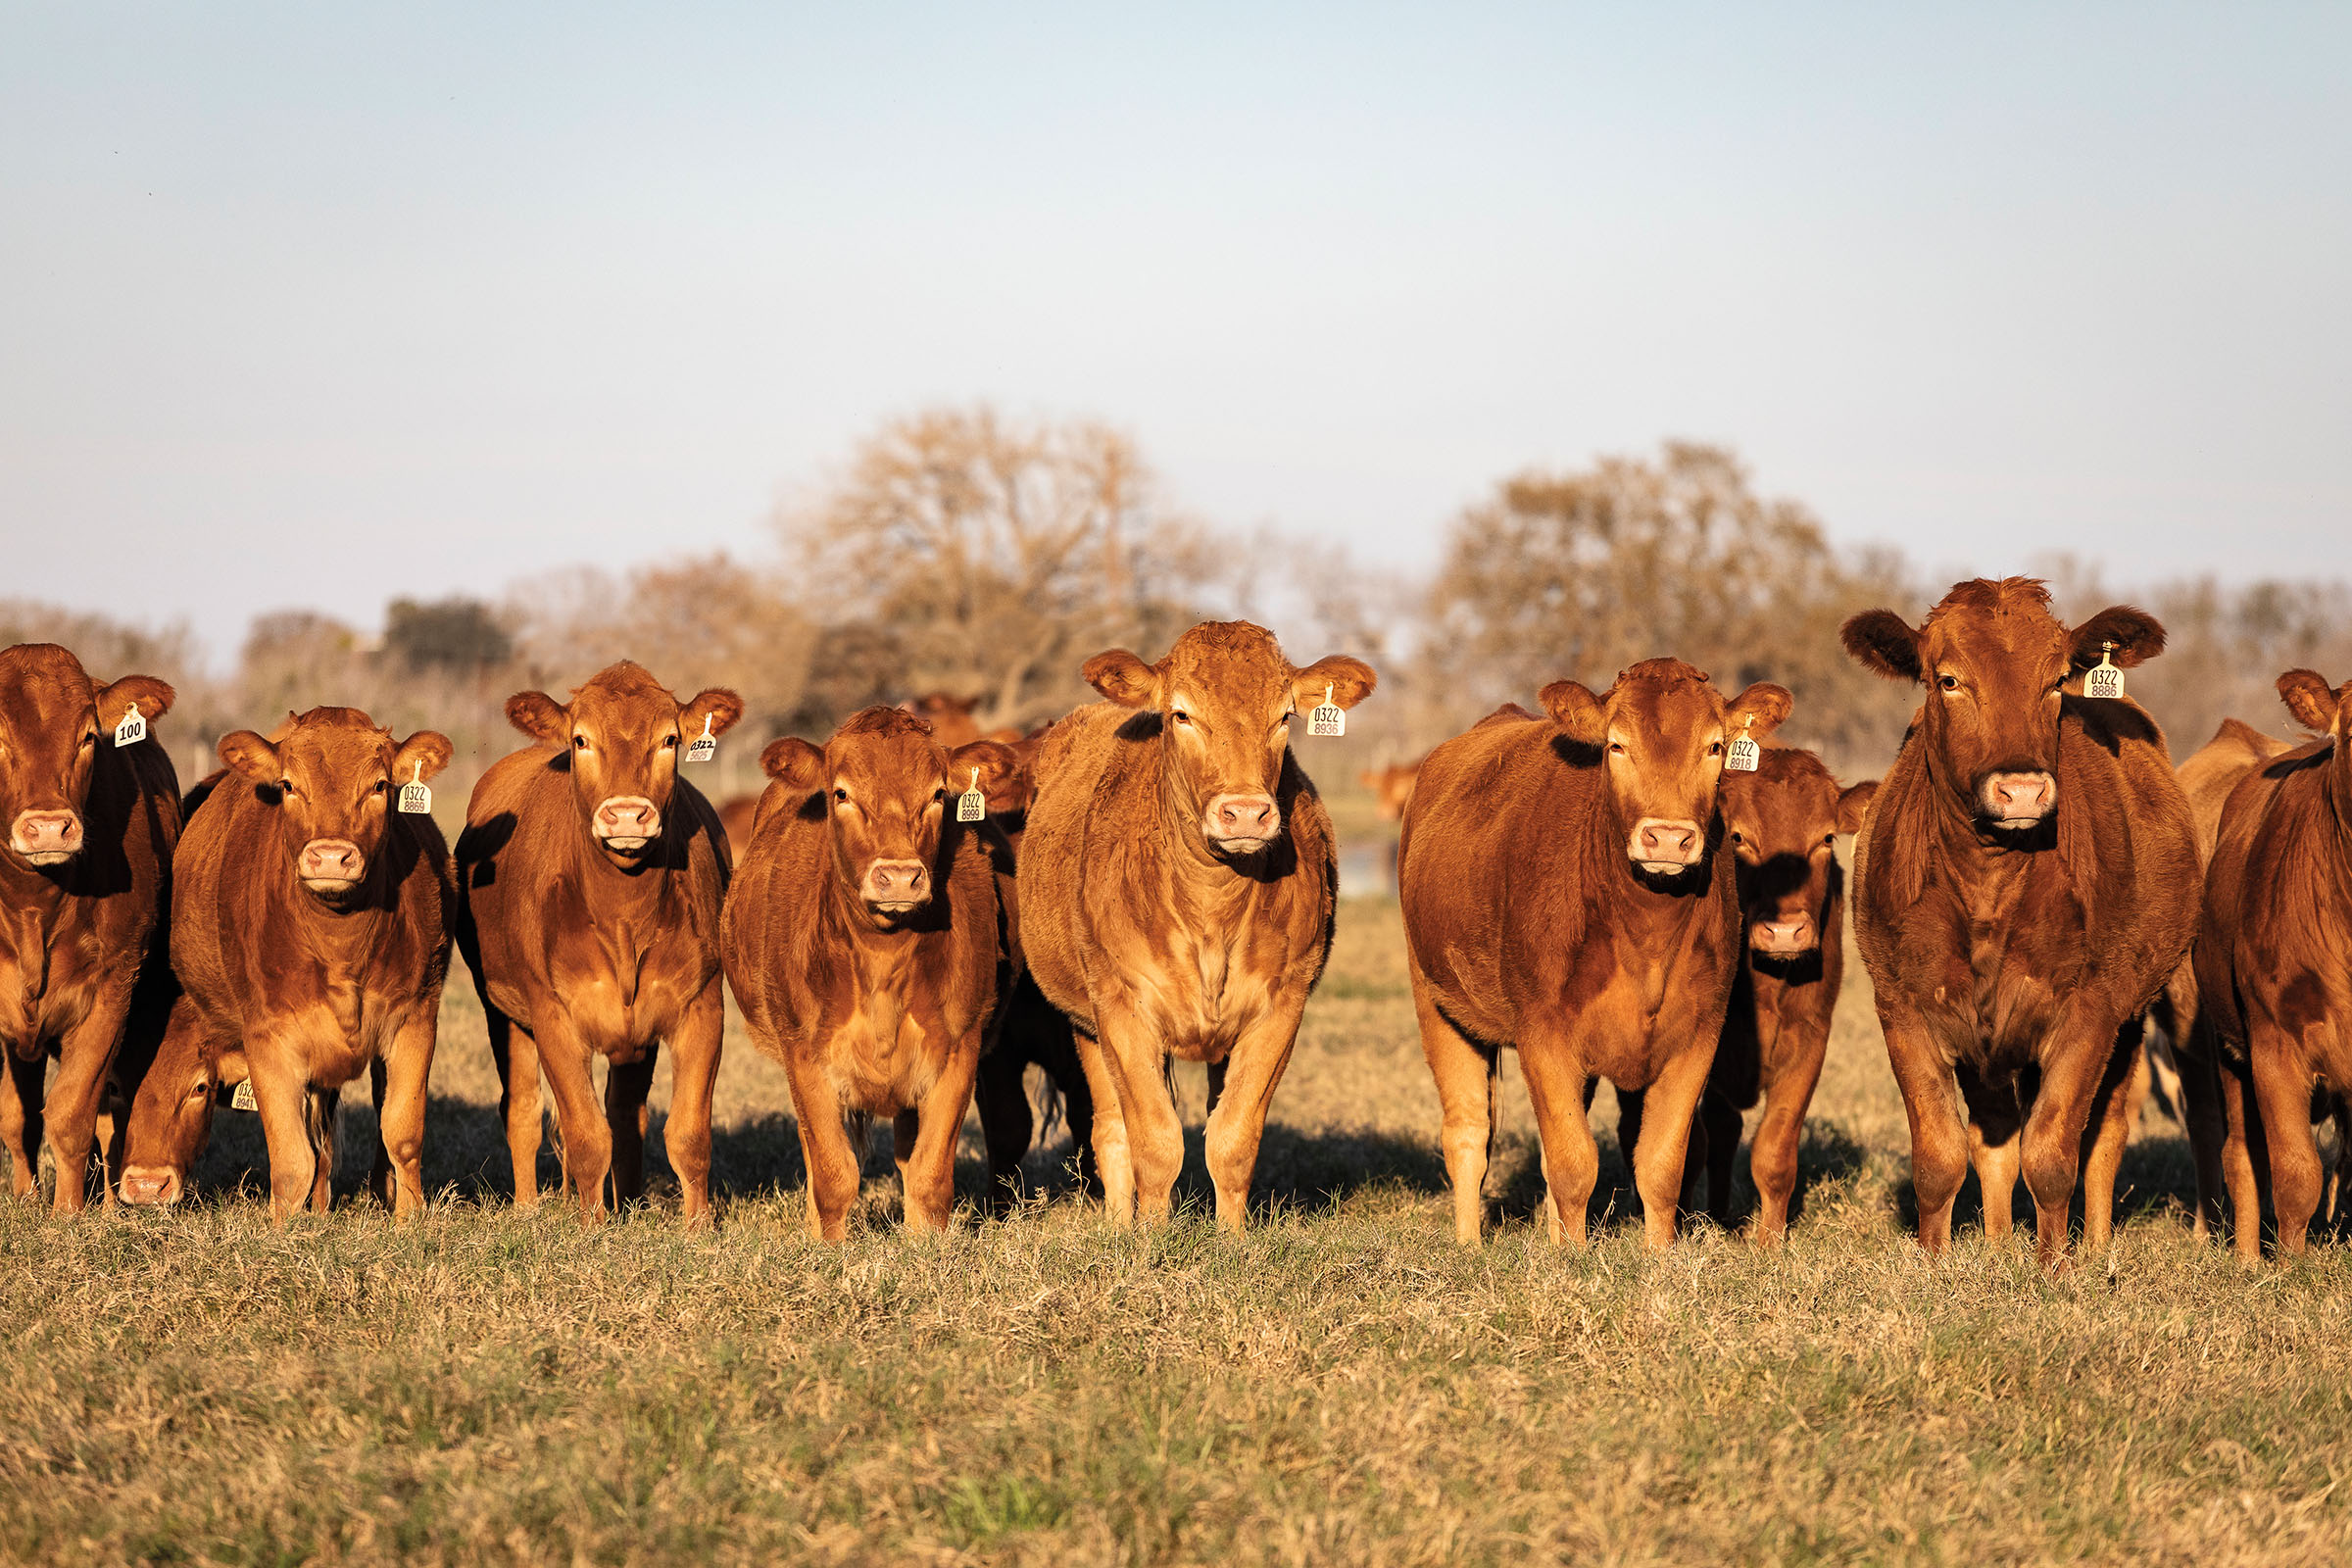 A collection of golden/tan cows stand in a grassy field